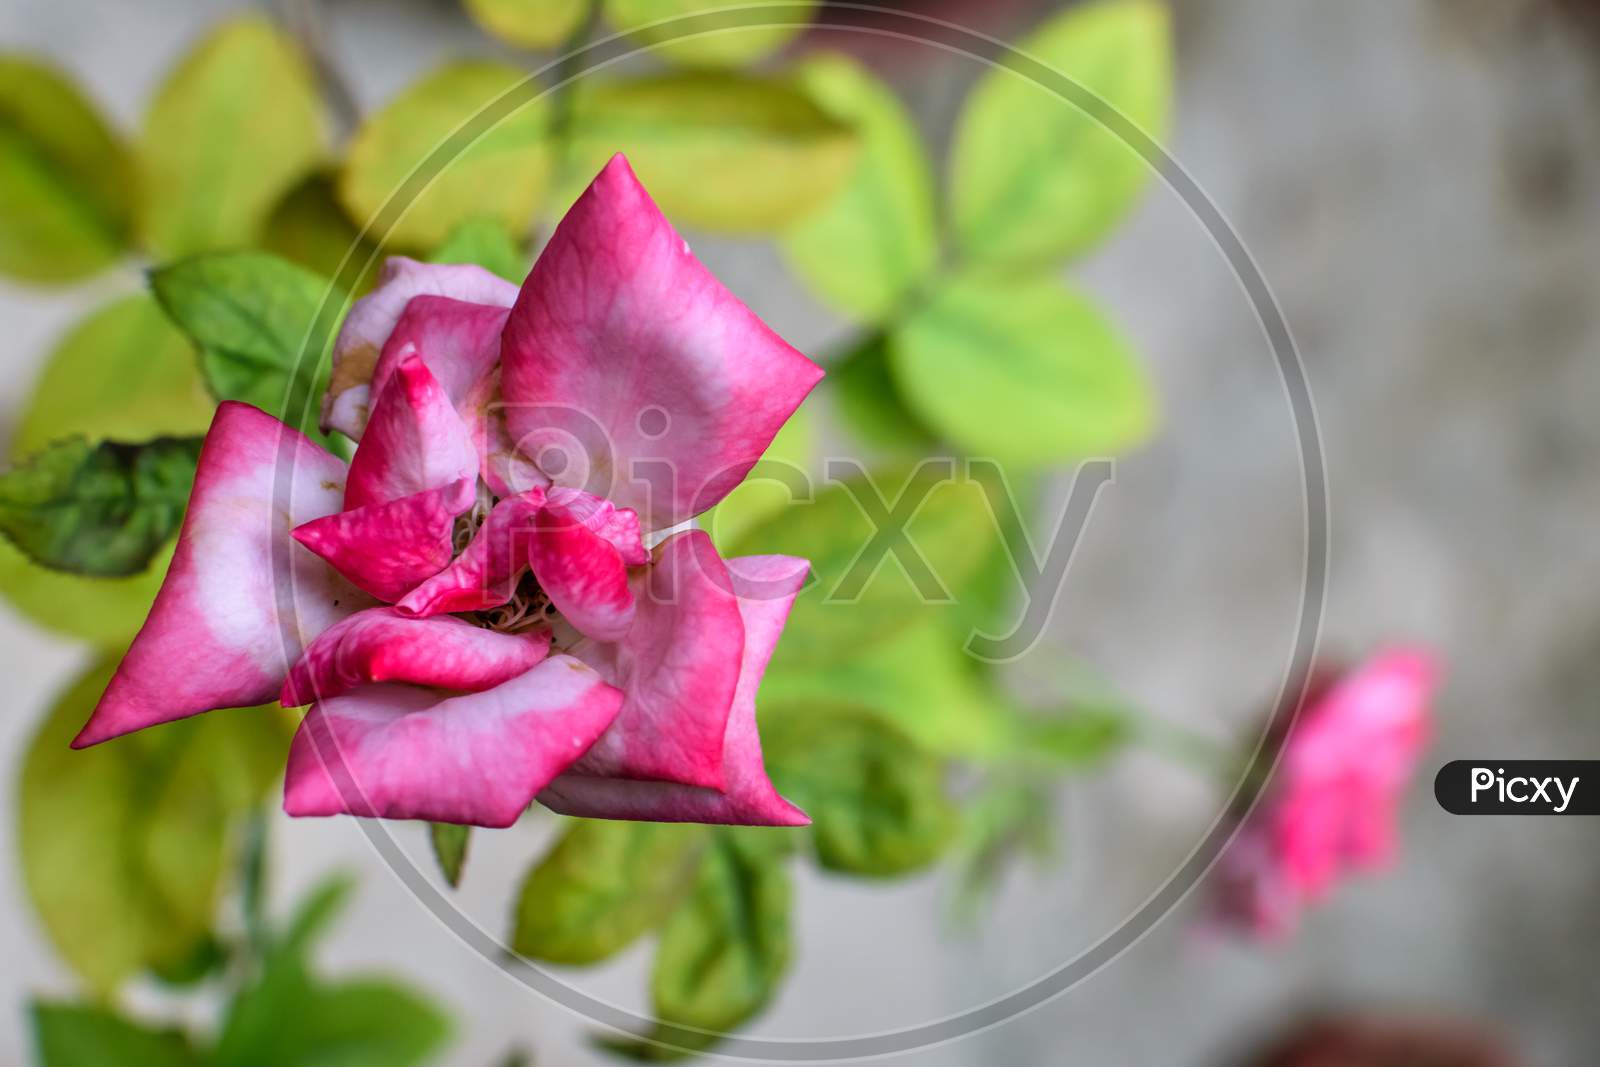 An Isolated Pink Rose In Focus With It Leaves And Another Rose In The Background